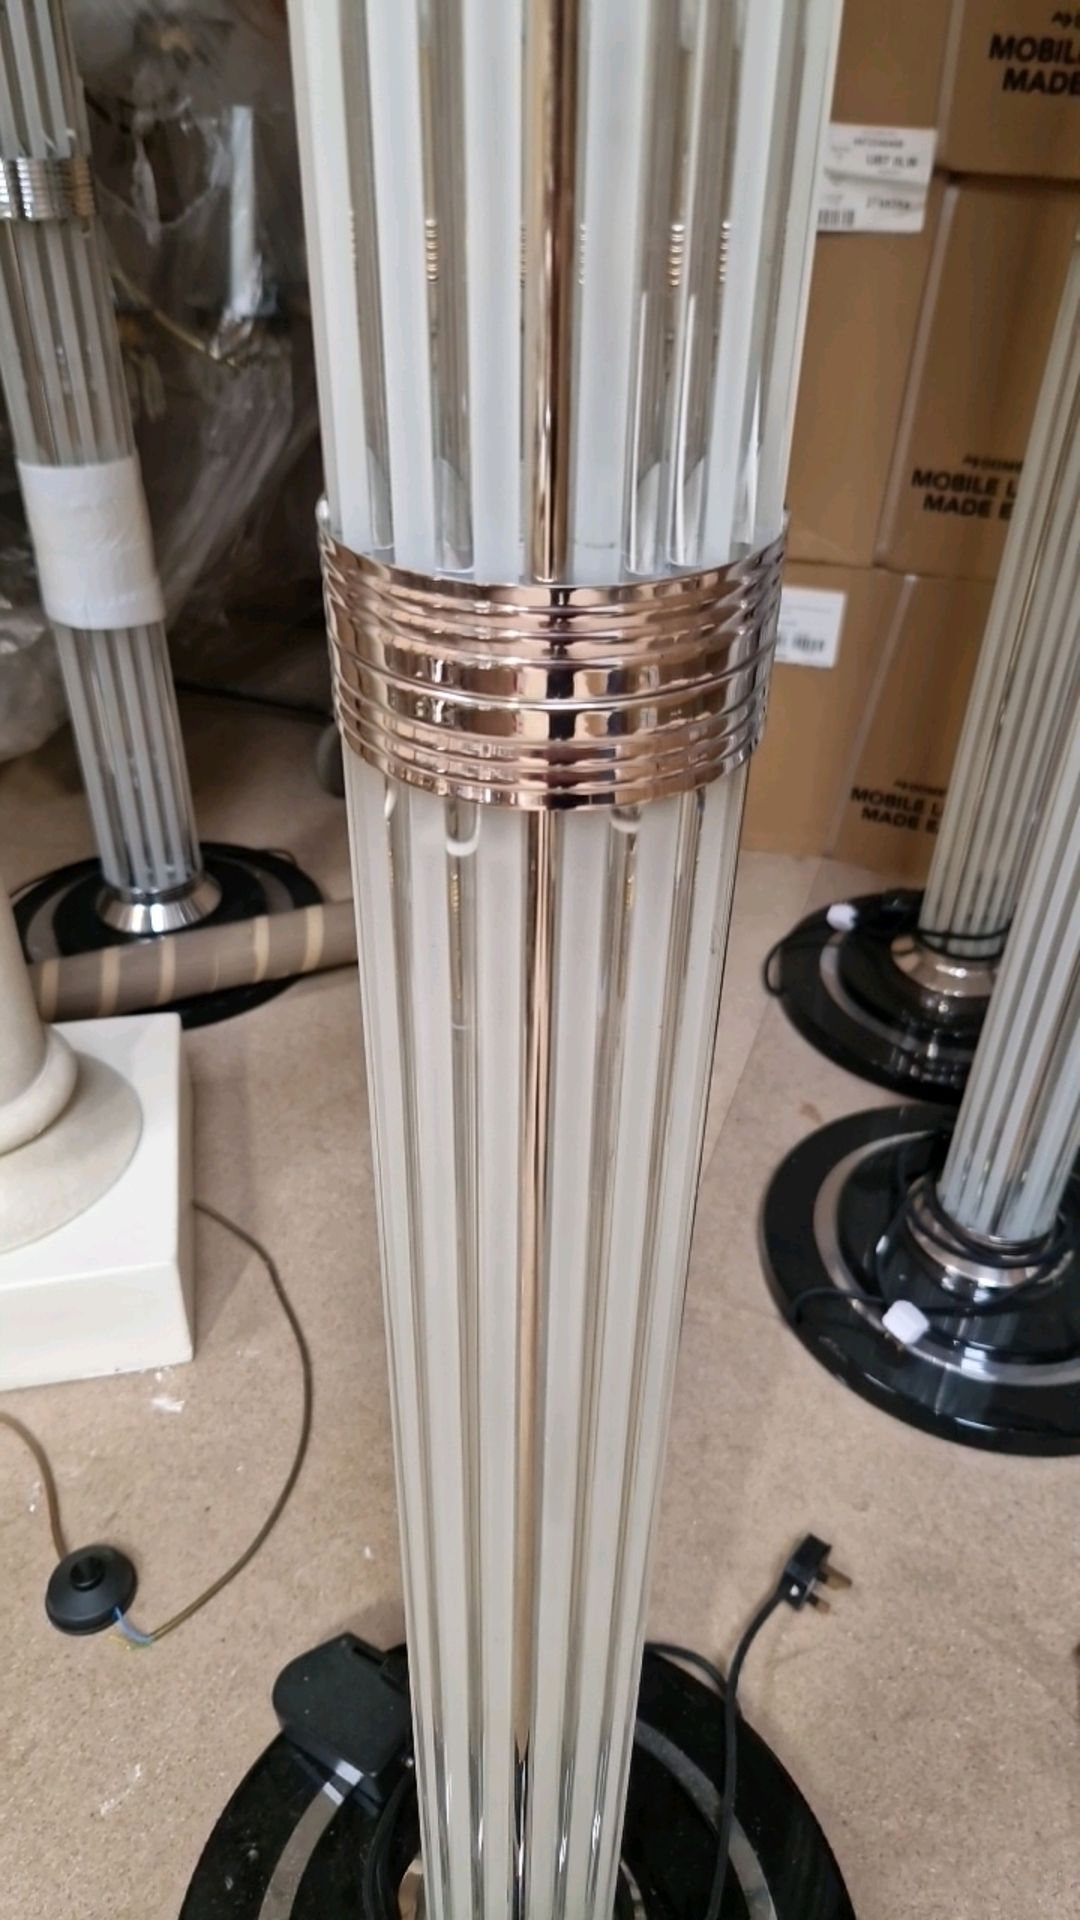 Art Deco Style Model le Mons Glass Rods, Chrome, and Black Lacquer Floor Lamp - Image 5 of 7